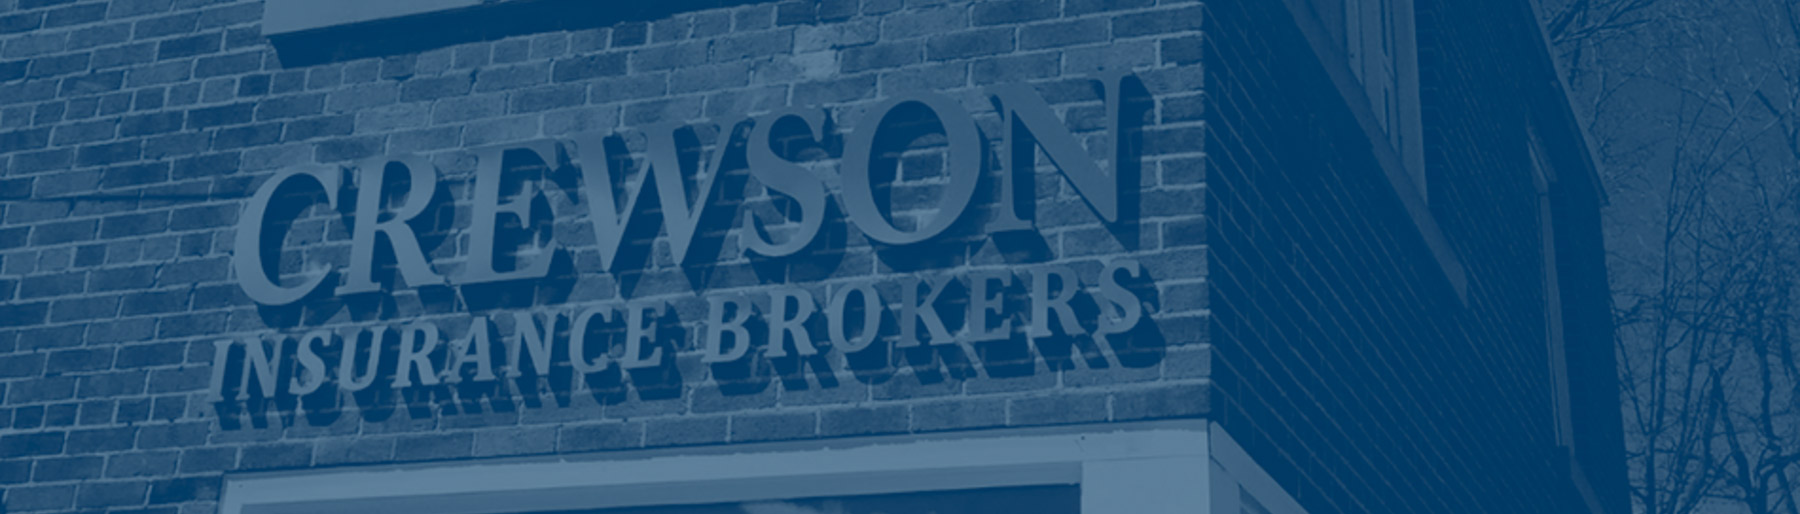 Crewson Insurance Products